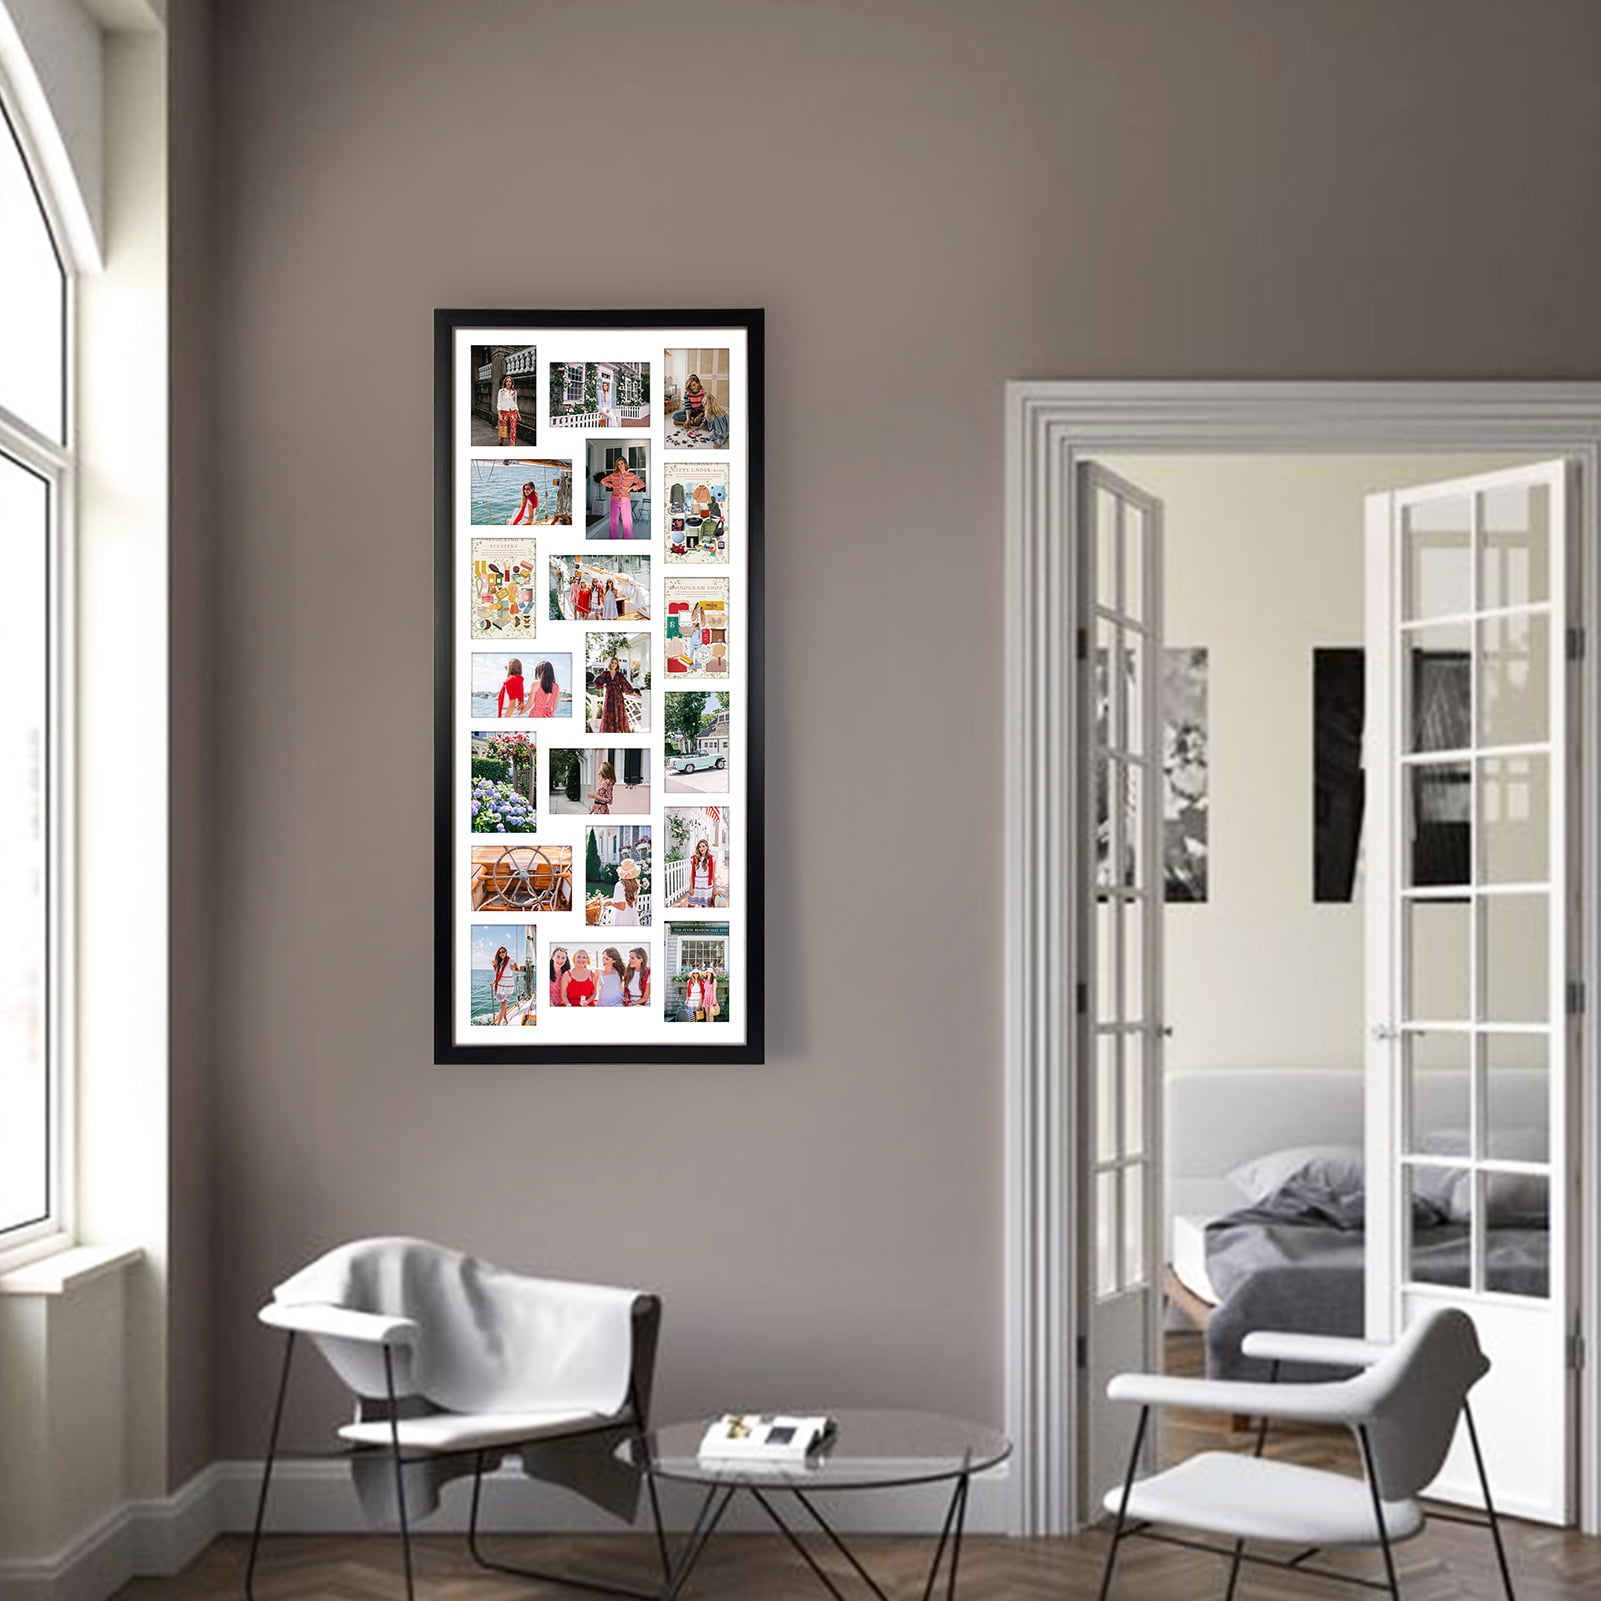 Lavish Home 12-Opening 4 in. x 6 in. Black Picture Frame Collage HW0200067  - The Home Depot